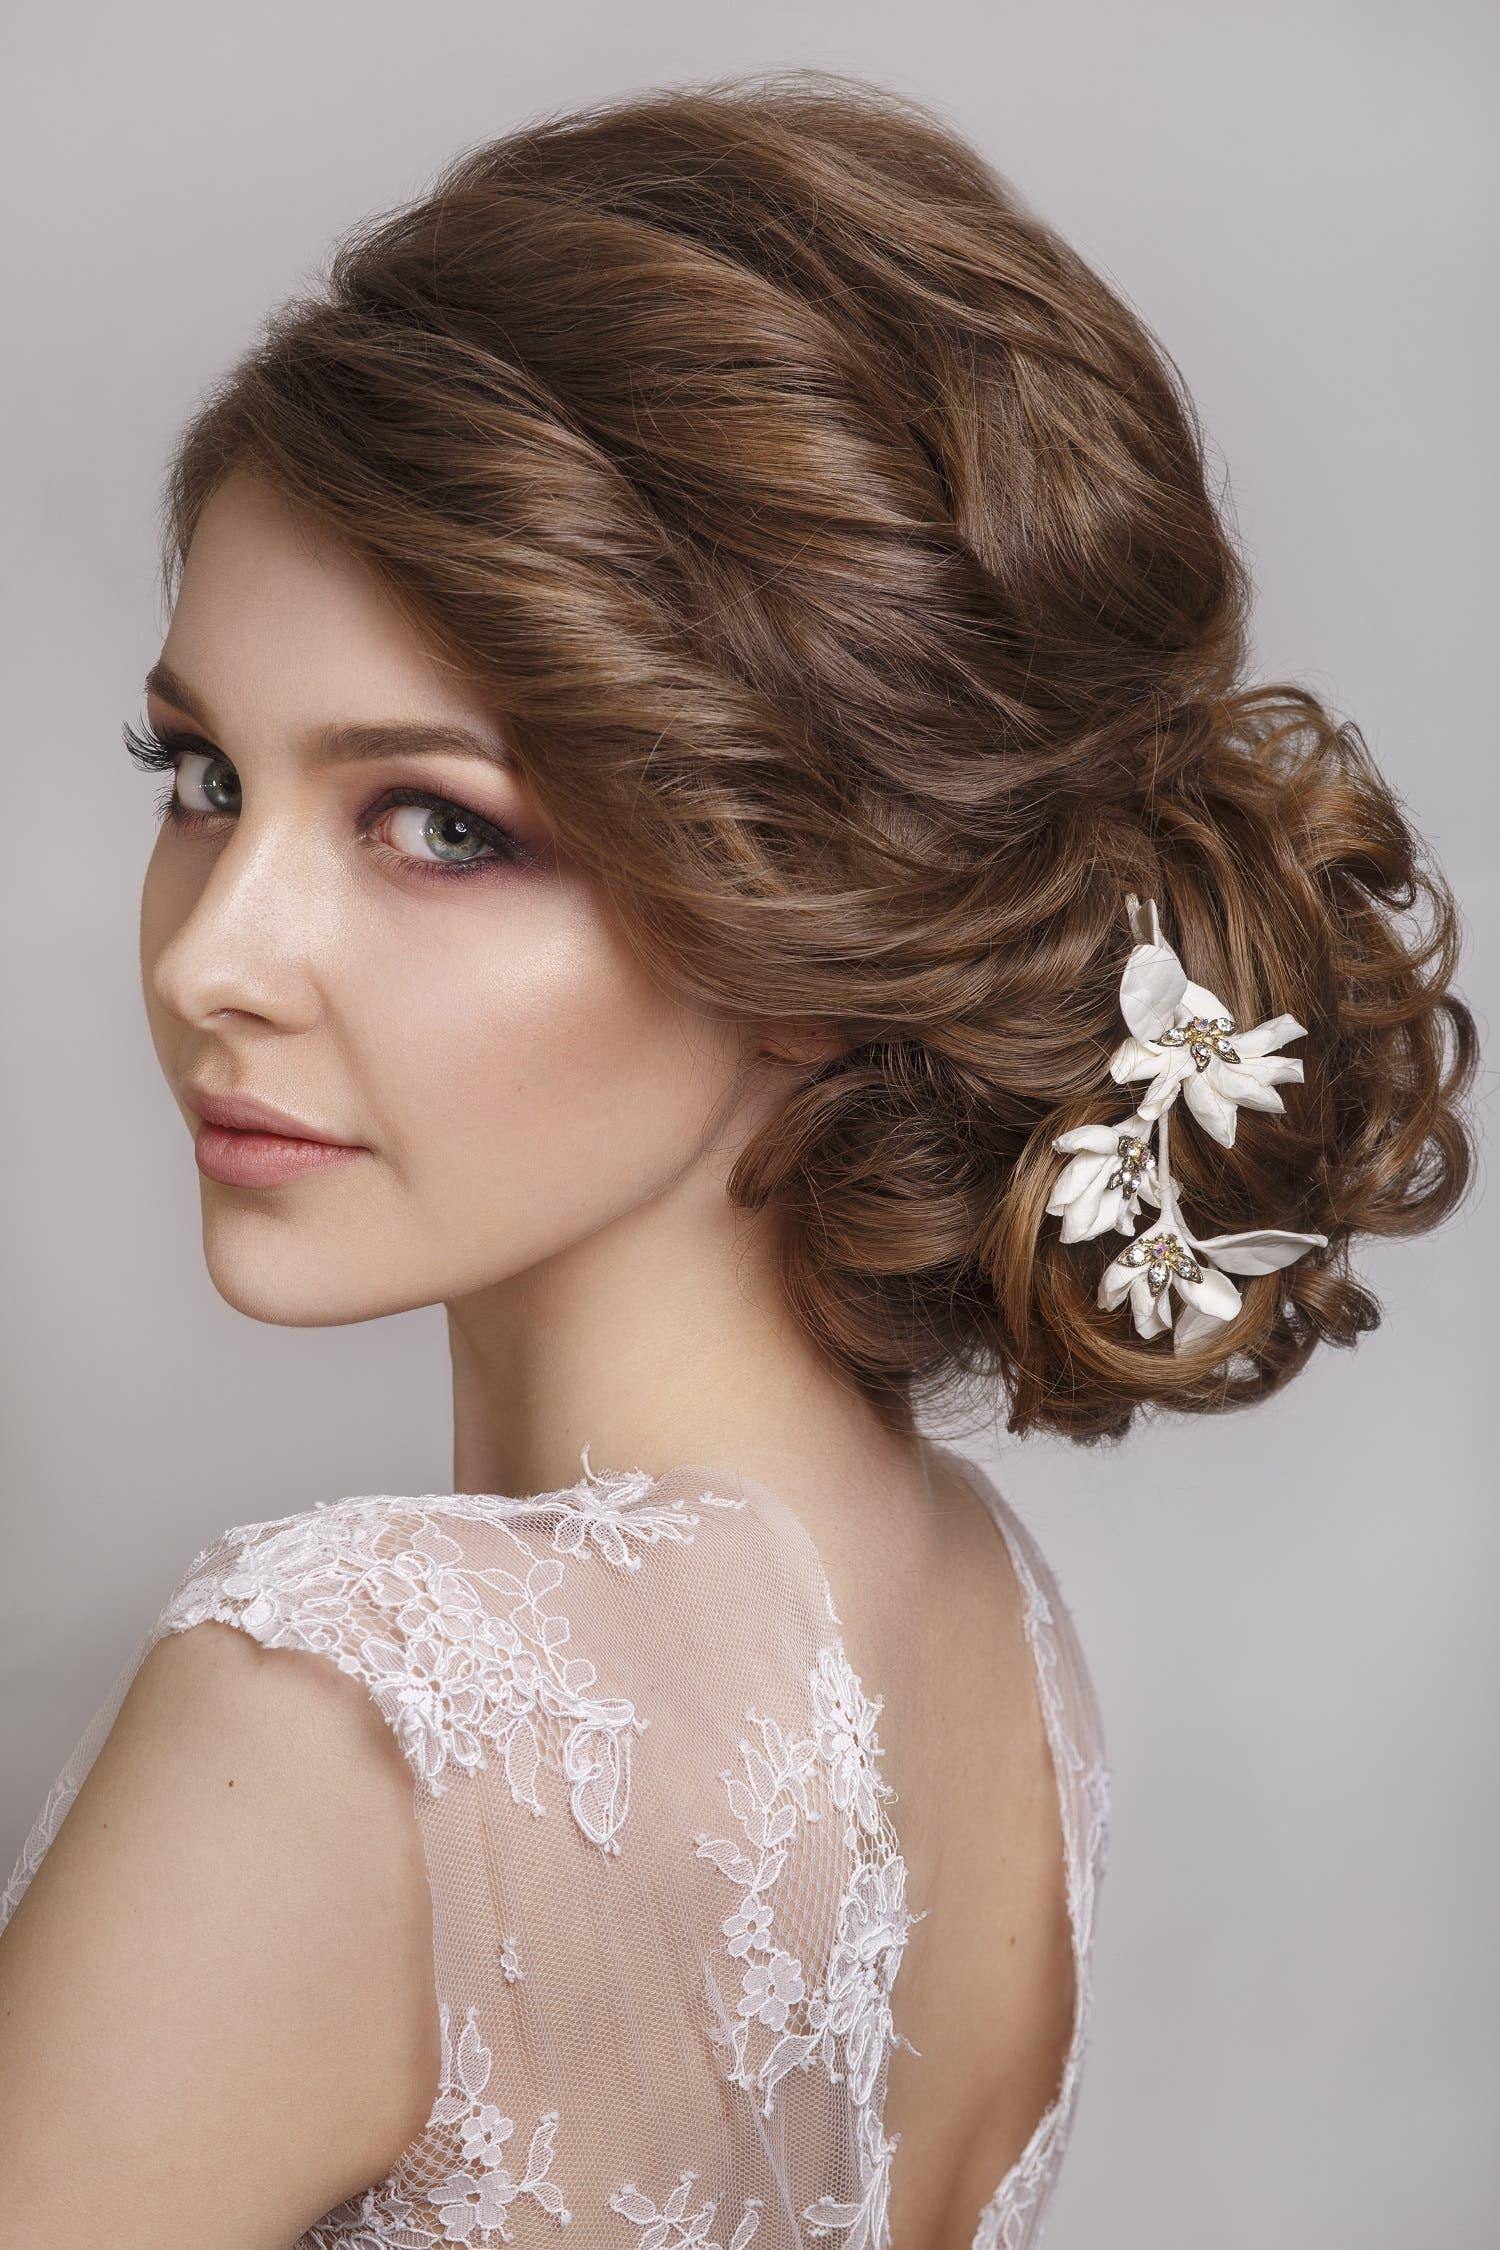 Wedding Bride Hairstyles
 Choosing the perfect hairstyle to match your wedding dress